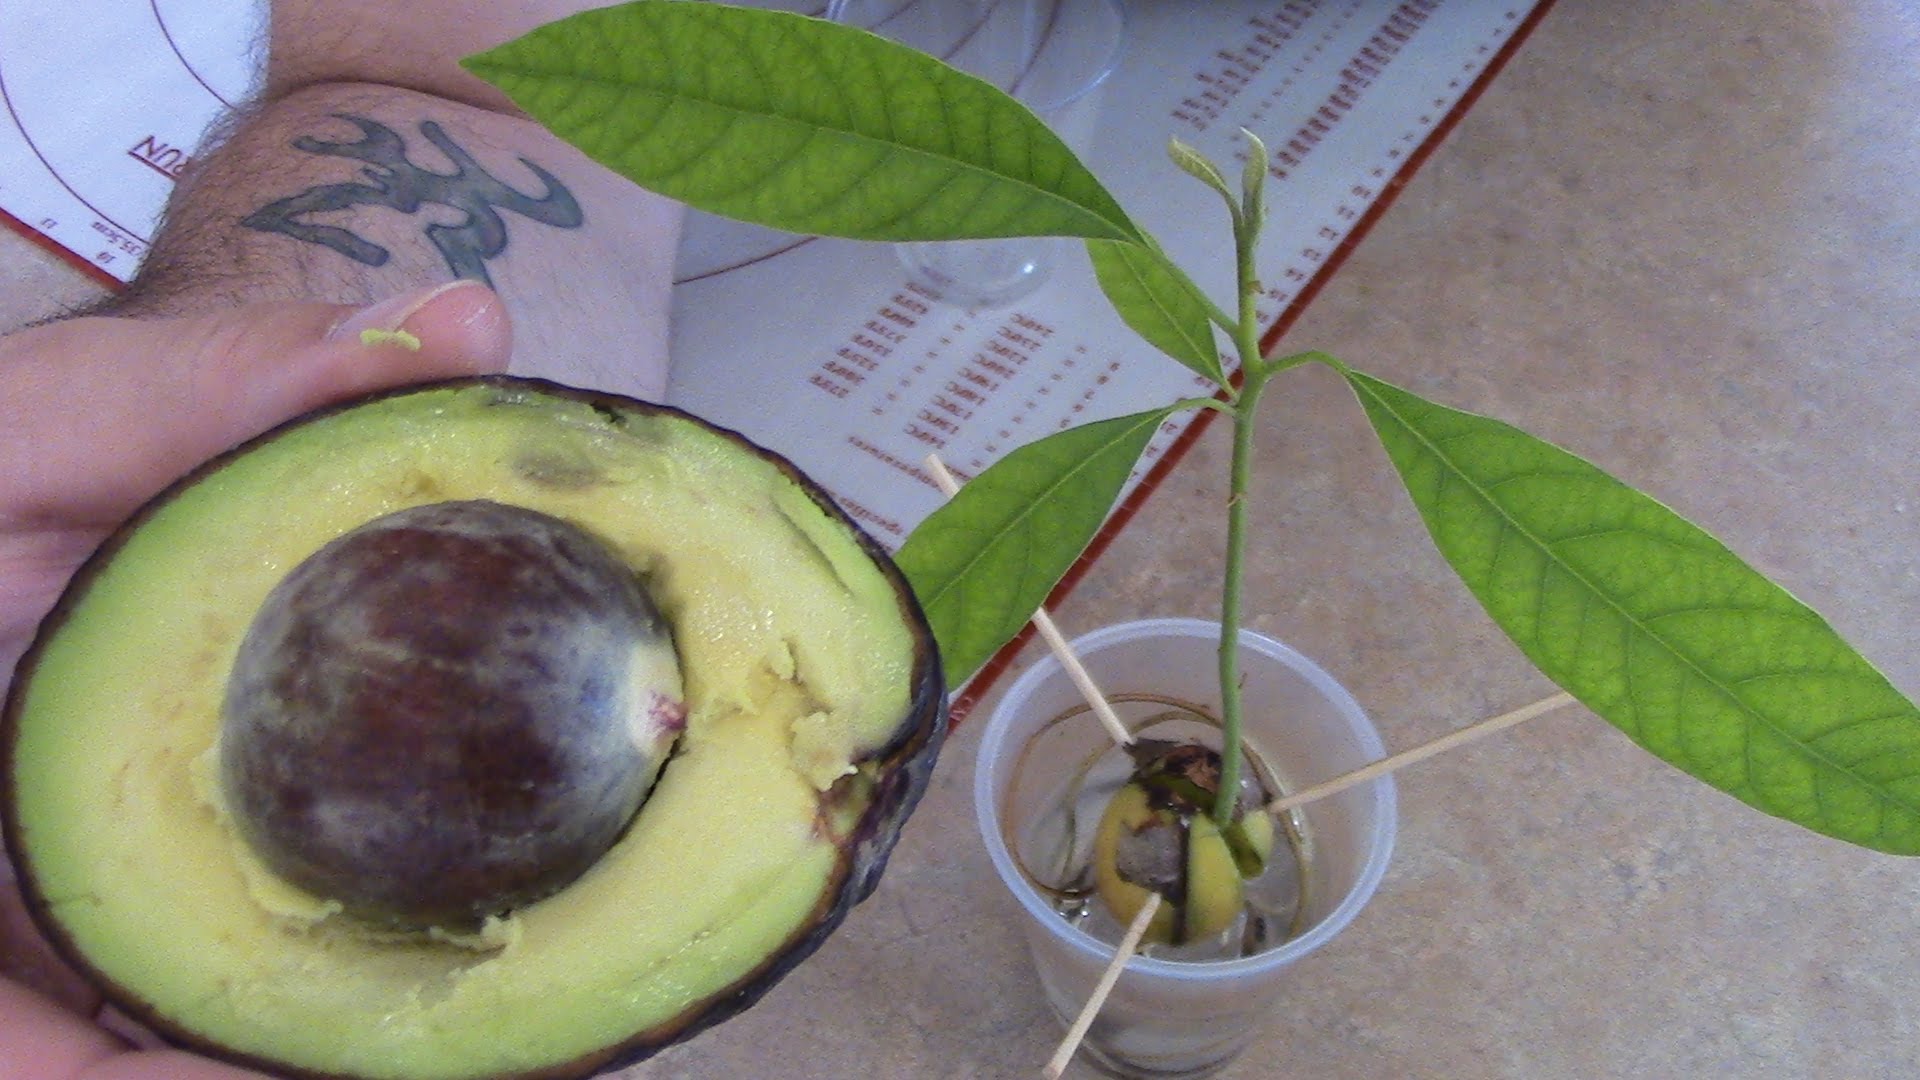 HOW TO GROW AVOCADO TREE FROM SEED Viral On The Web Now